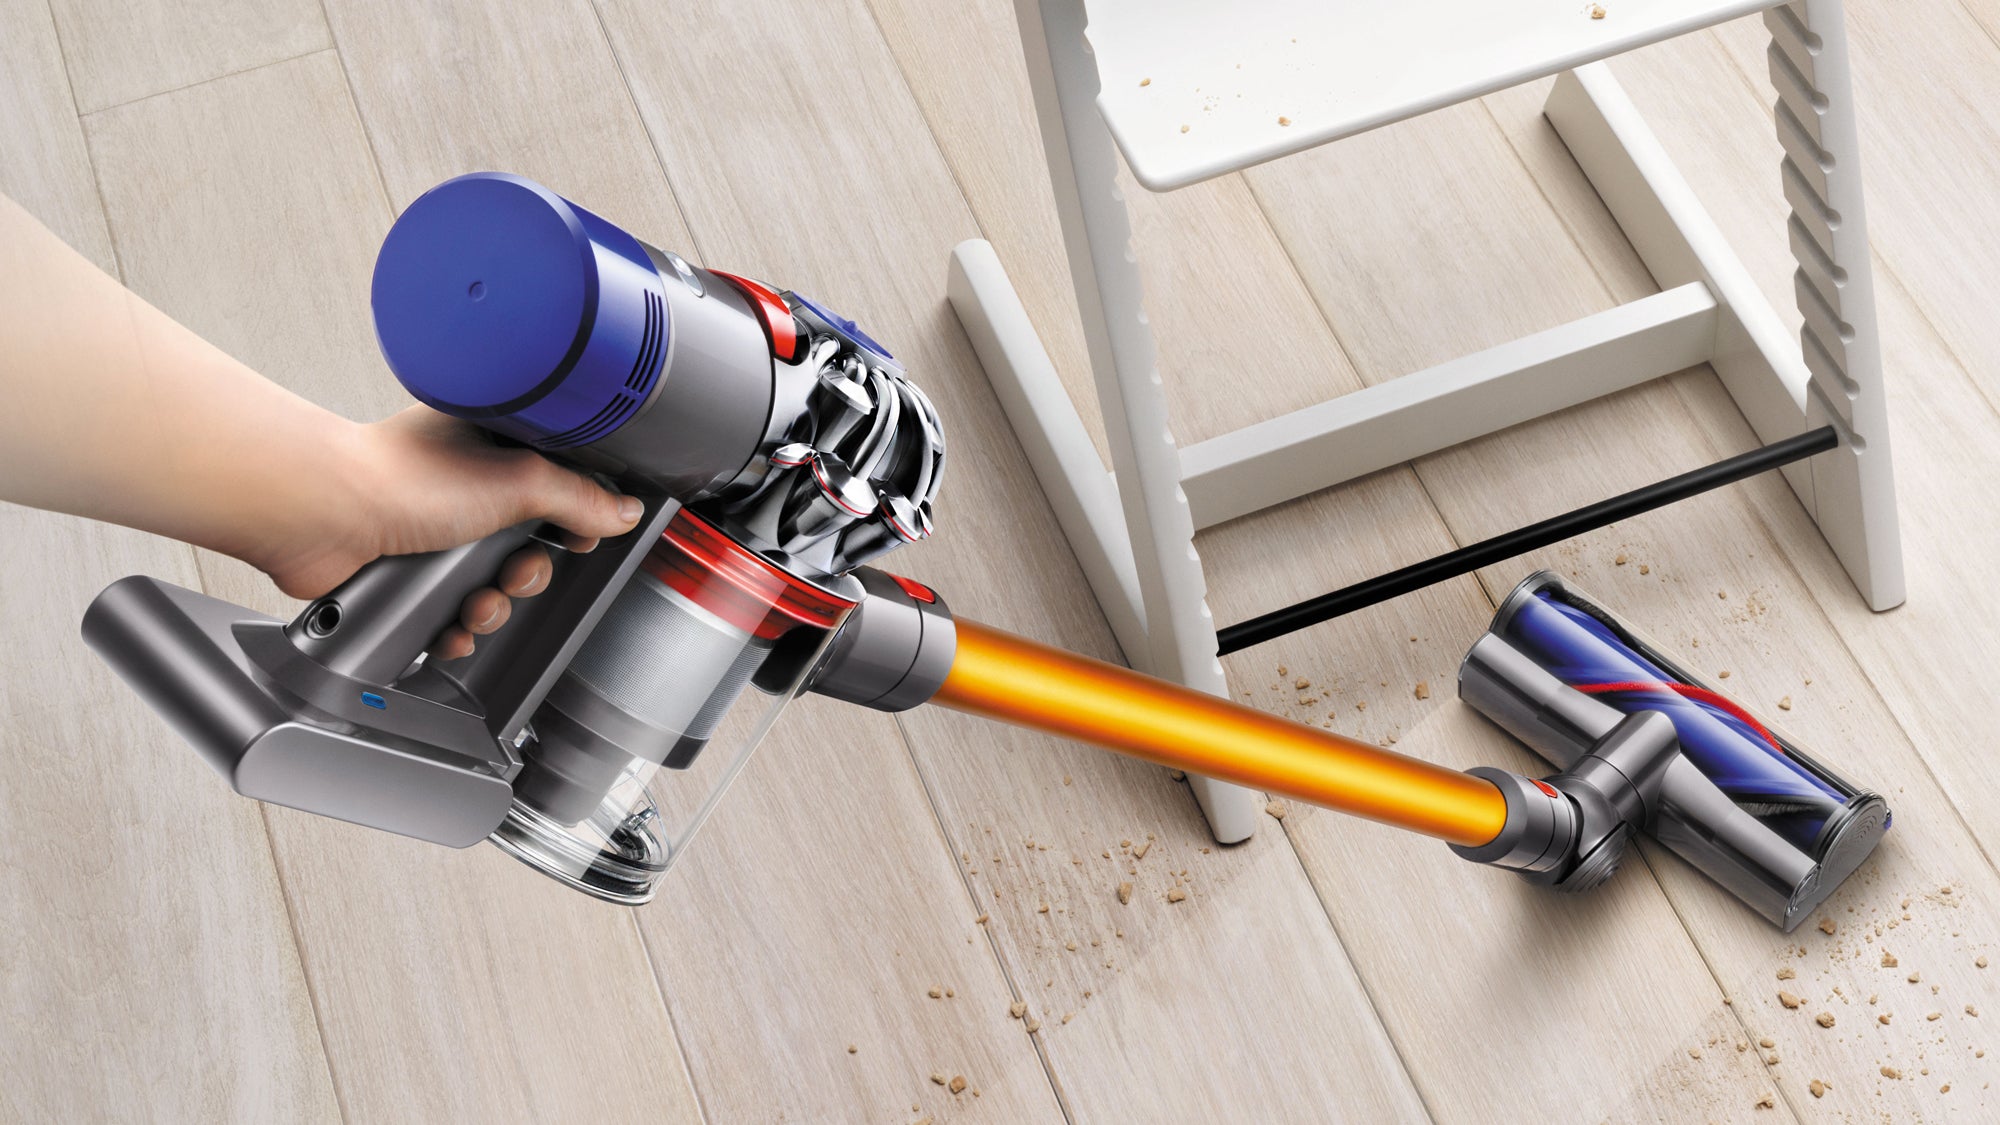 Cordless Shop Vacuum Cleaner: What are the common problems?